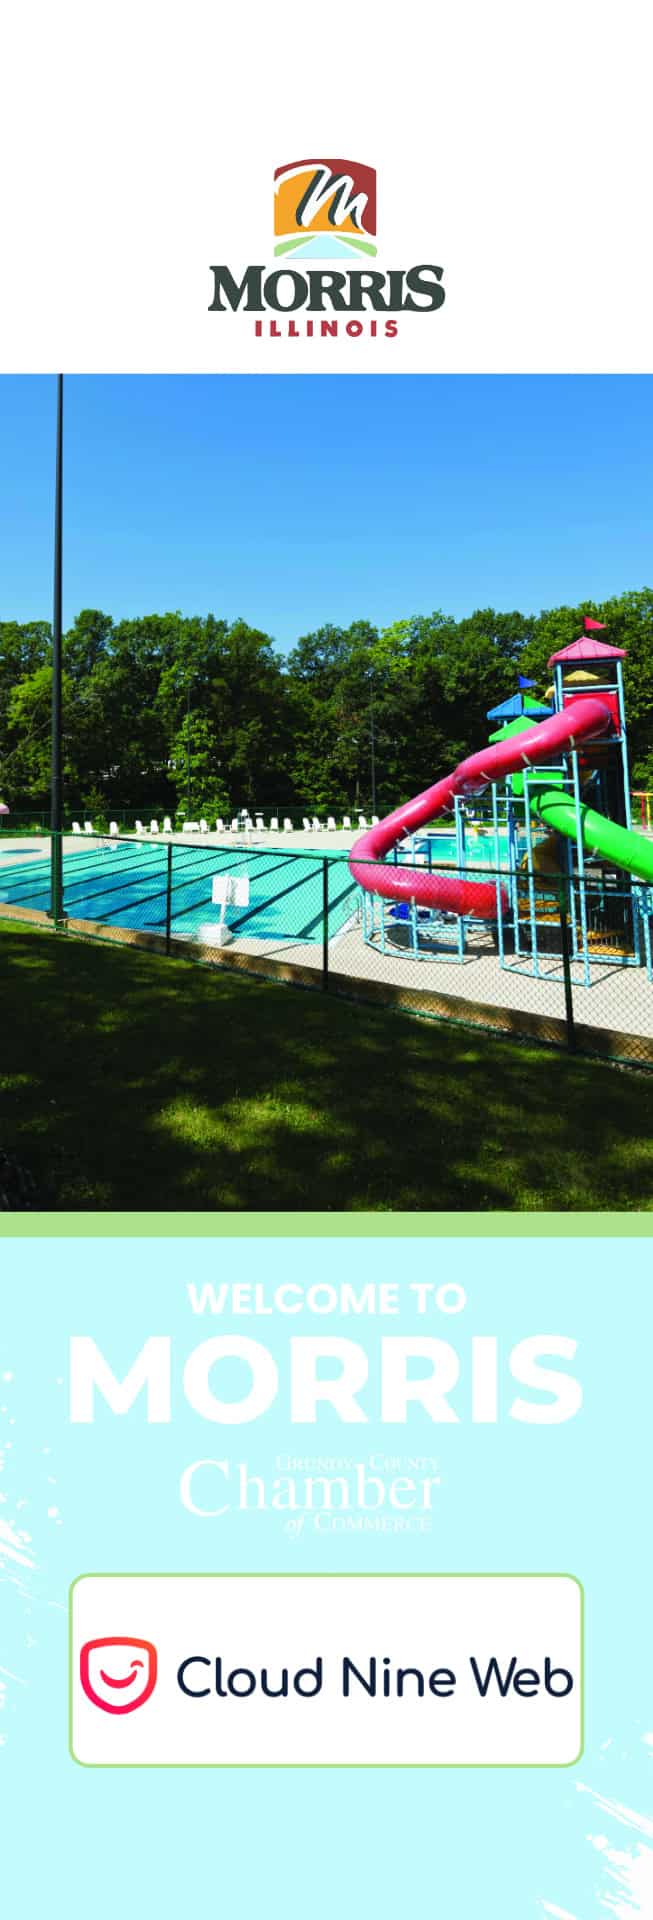 Morris, Illinois pool with colorful slides and logo.